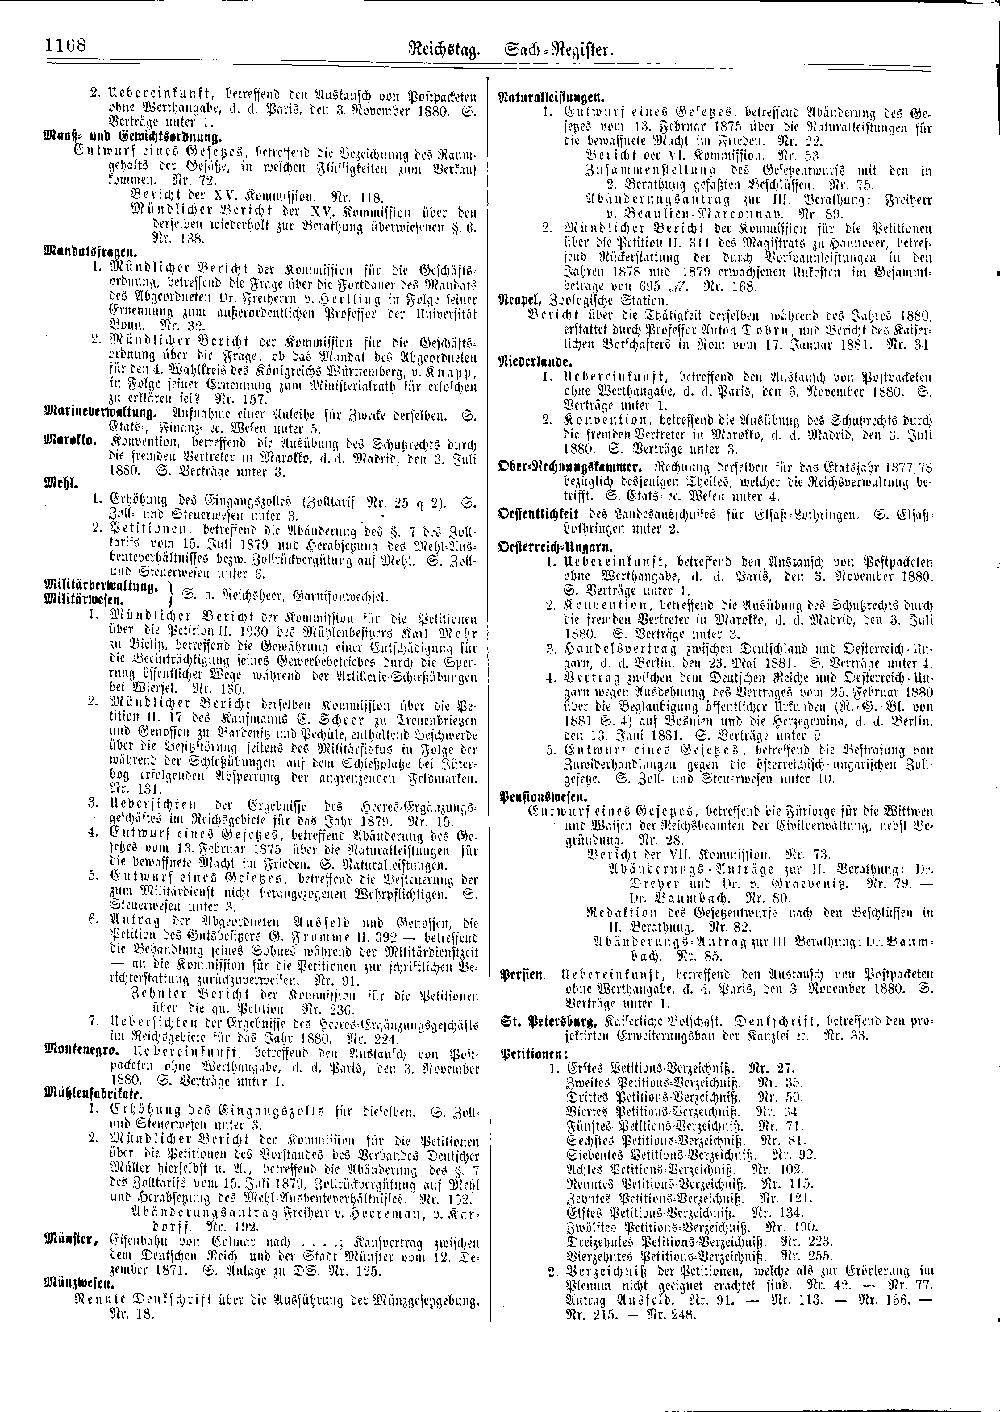 Scan of page 1168